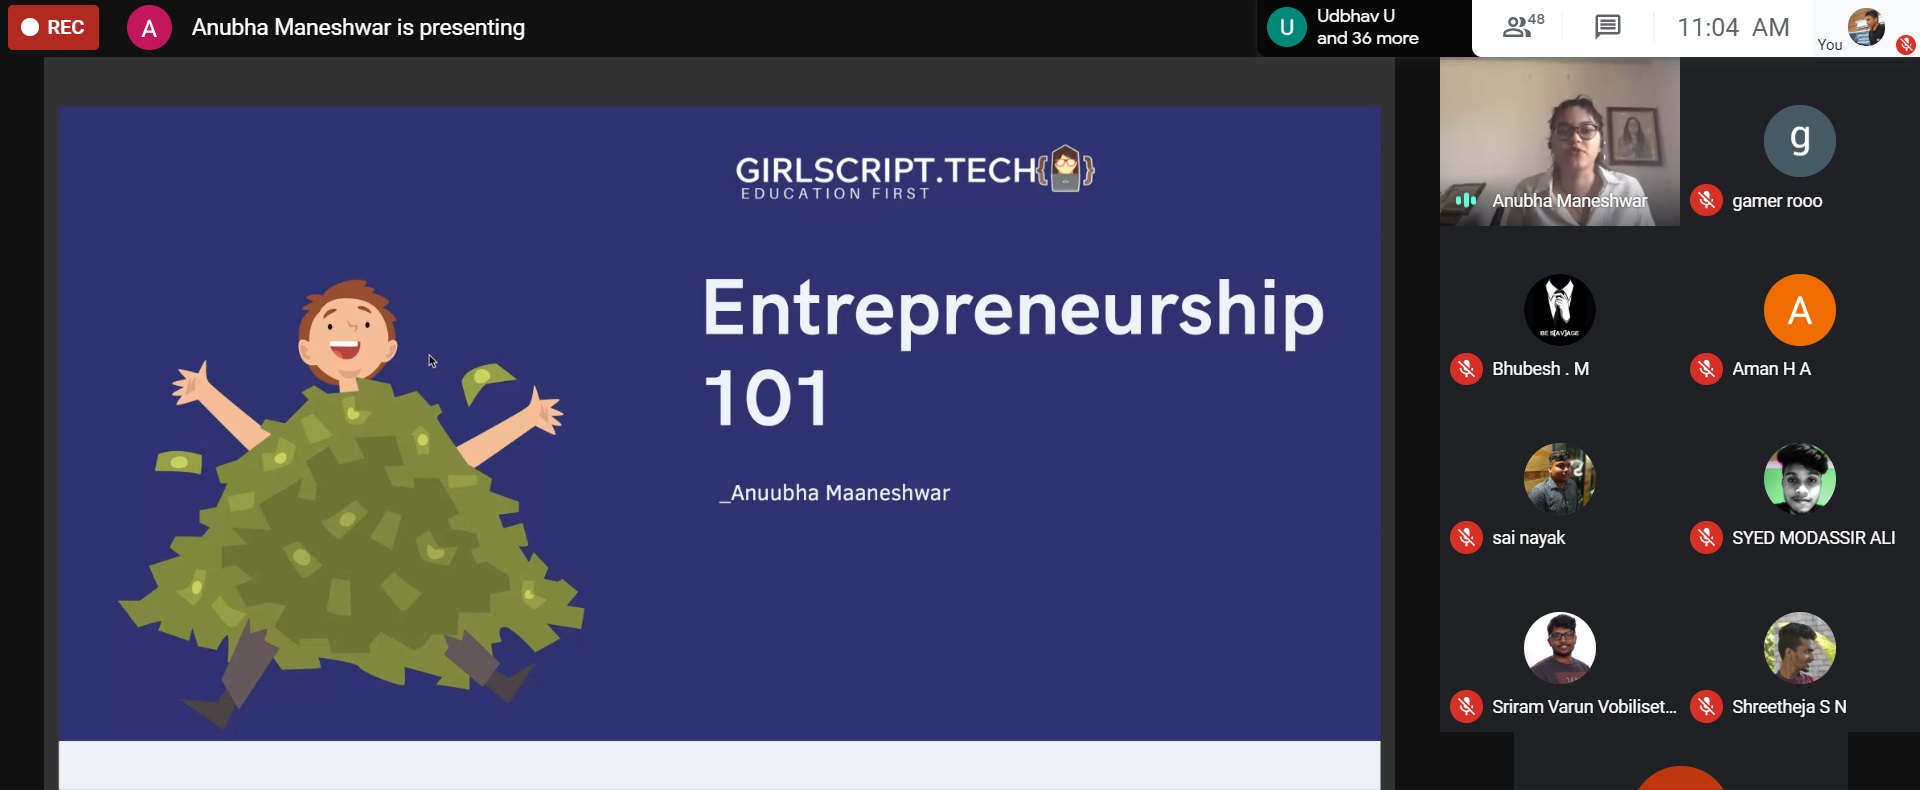 ACM-S organised their first Webinar ACM-S 1.0 facilitated by the Founding Director, Girlscript Foundation 